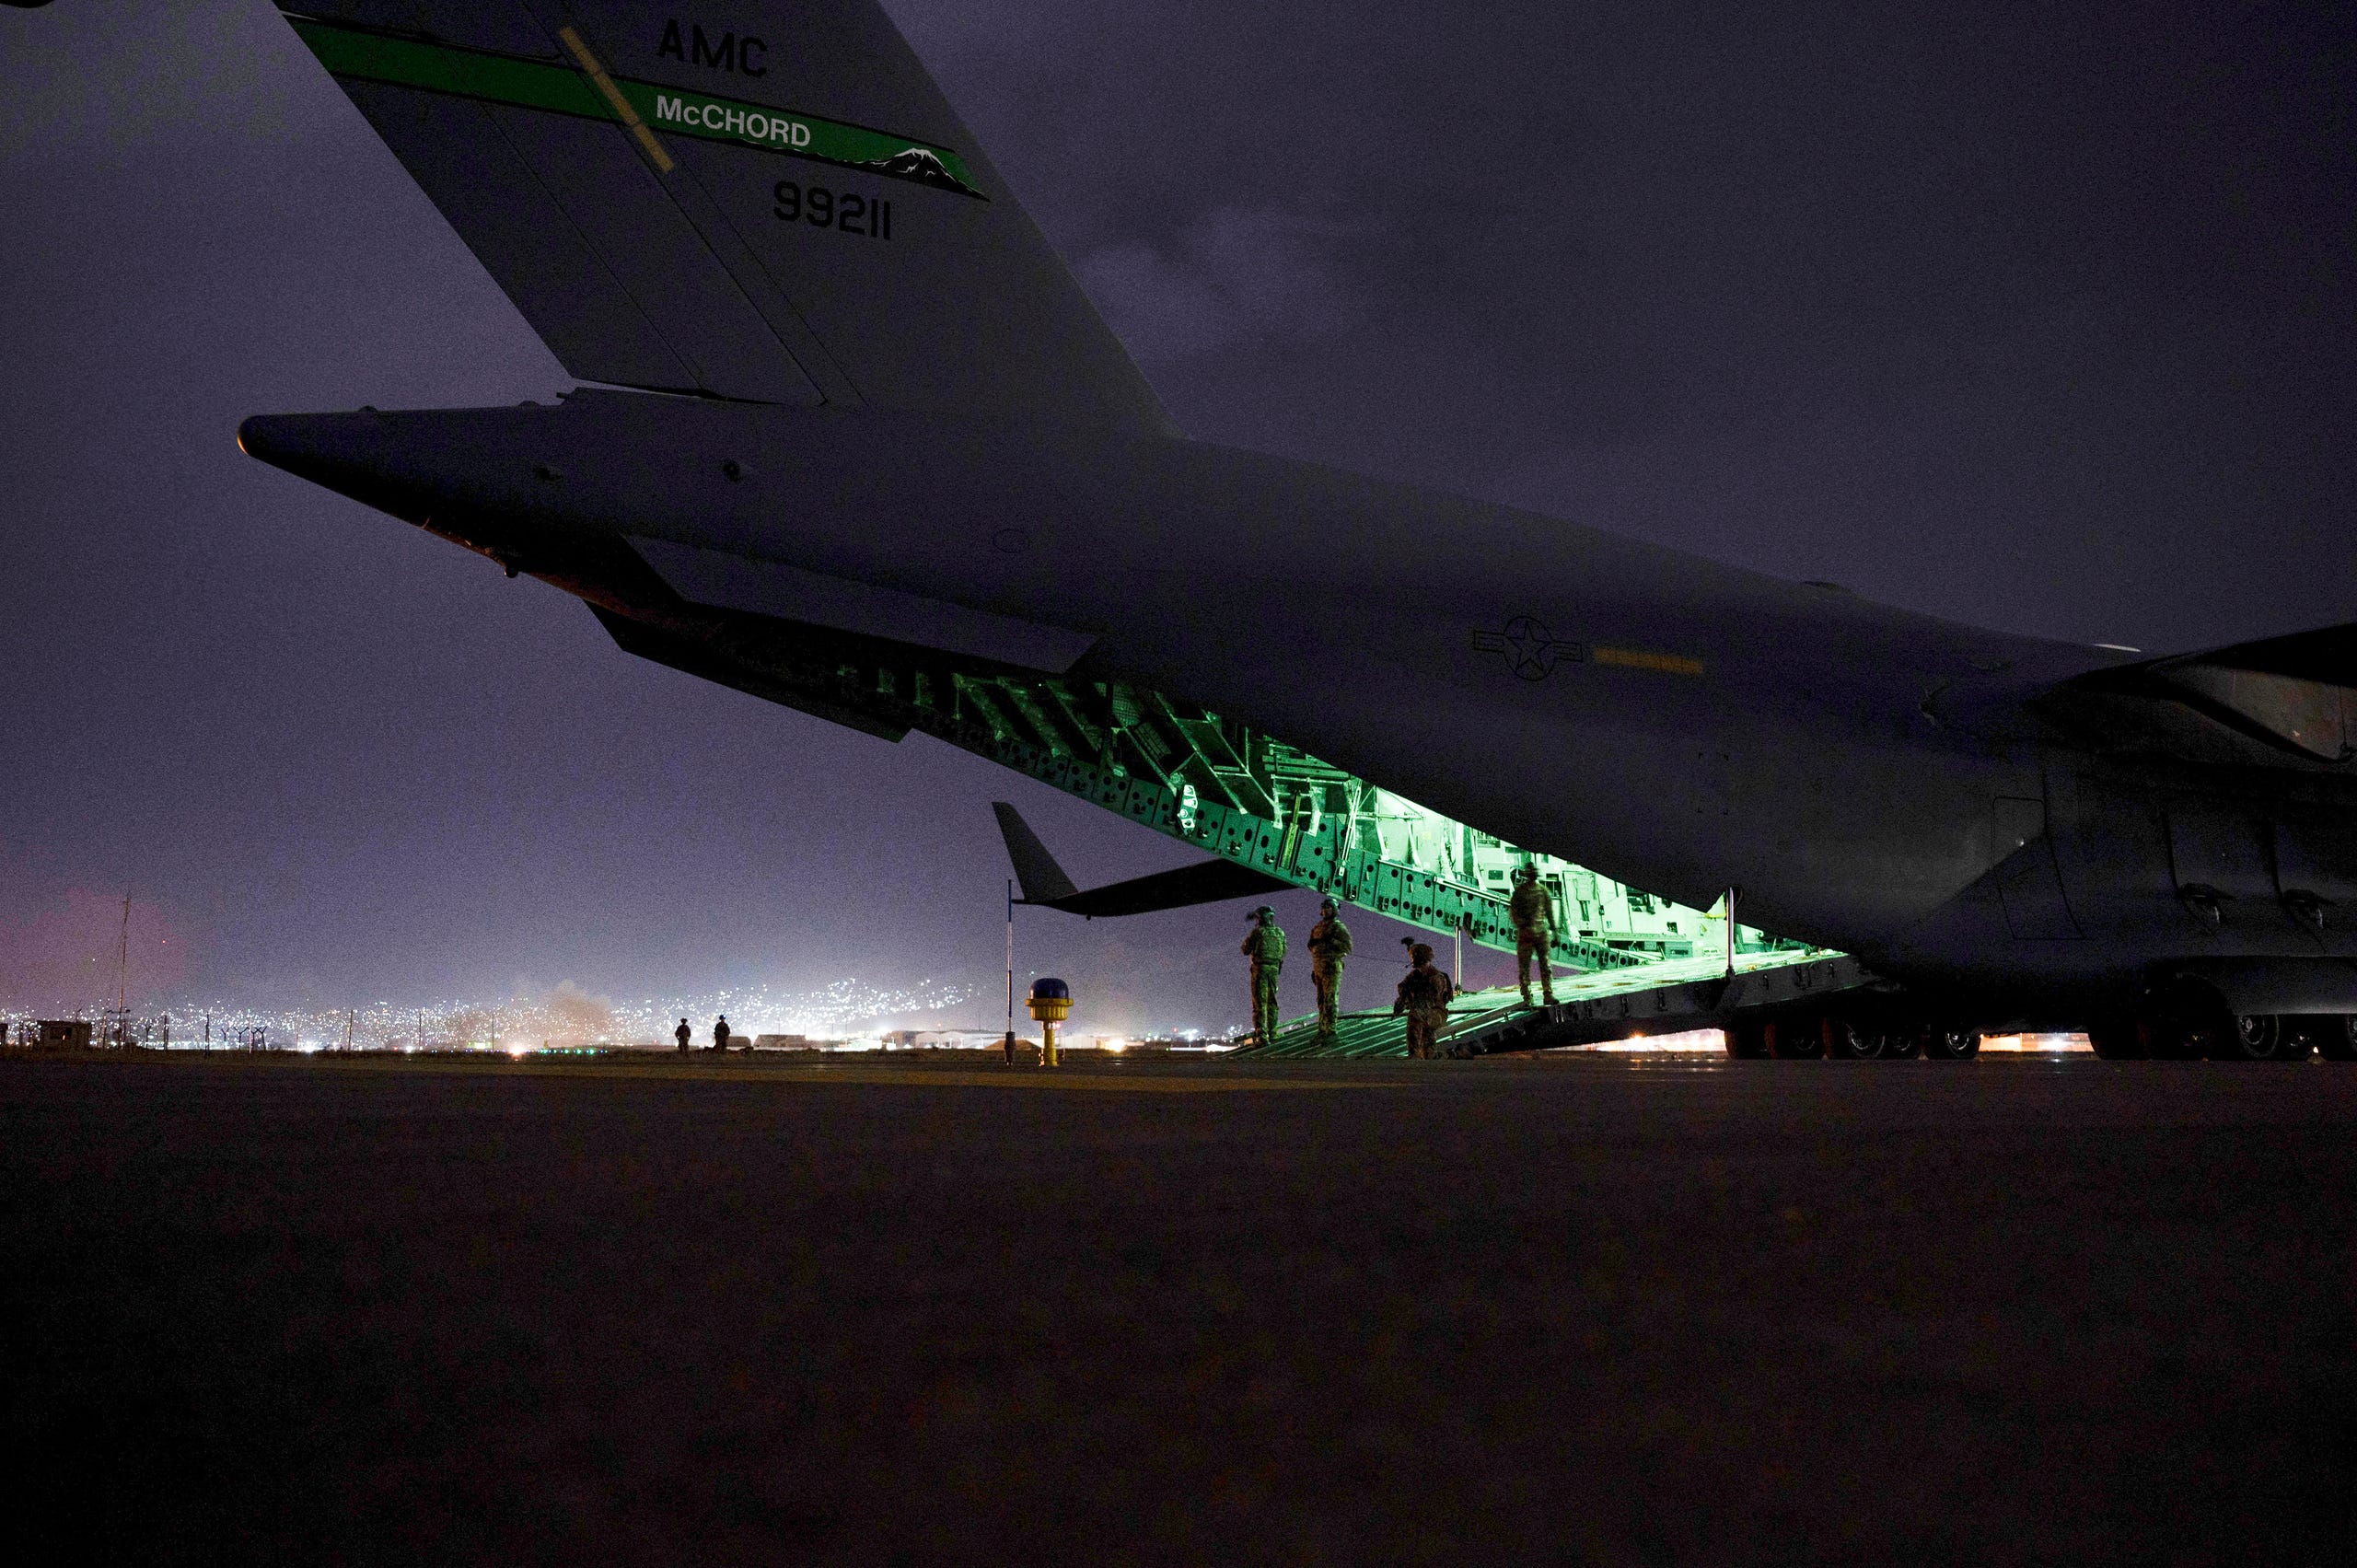 In this Aug. 30, 2021, photo provided by the U.S. Air Force, a Air Force aircrew, assigned to the 816th Expeditionary Airlift Squadron, prepares to receive soldiers, assigned to the 82nd Airborne Division, to board a U.S. Air Force C-17 Globemaster III aircraft in support of the final noncombatant evacuation operation missions at Hamid Karzai International Airport in Kabul Afghanistan.